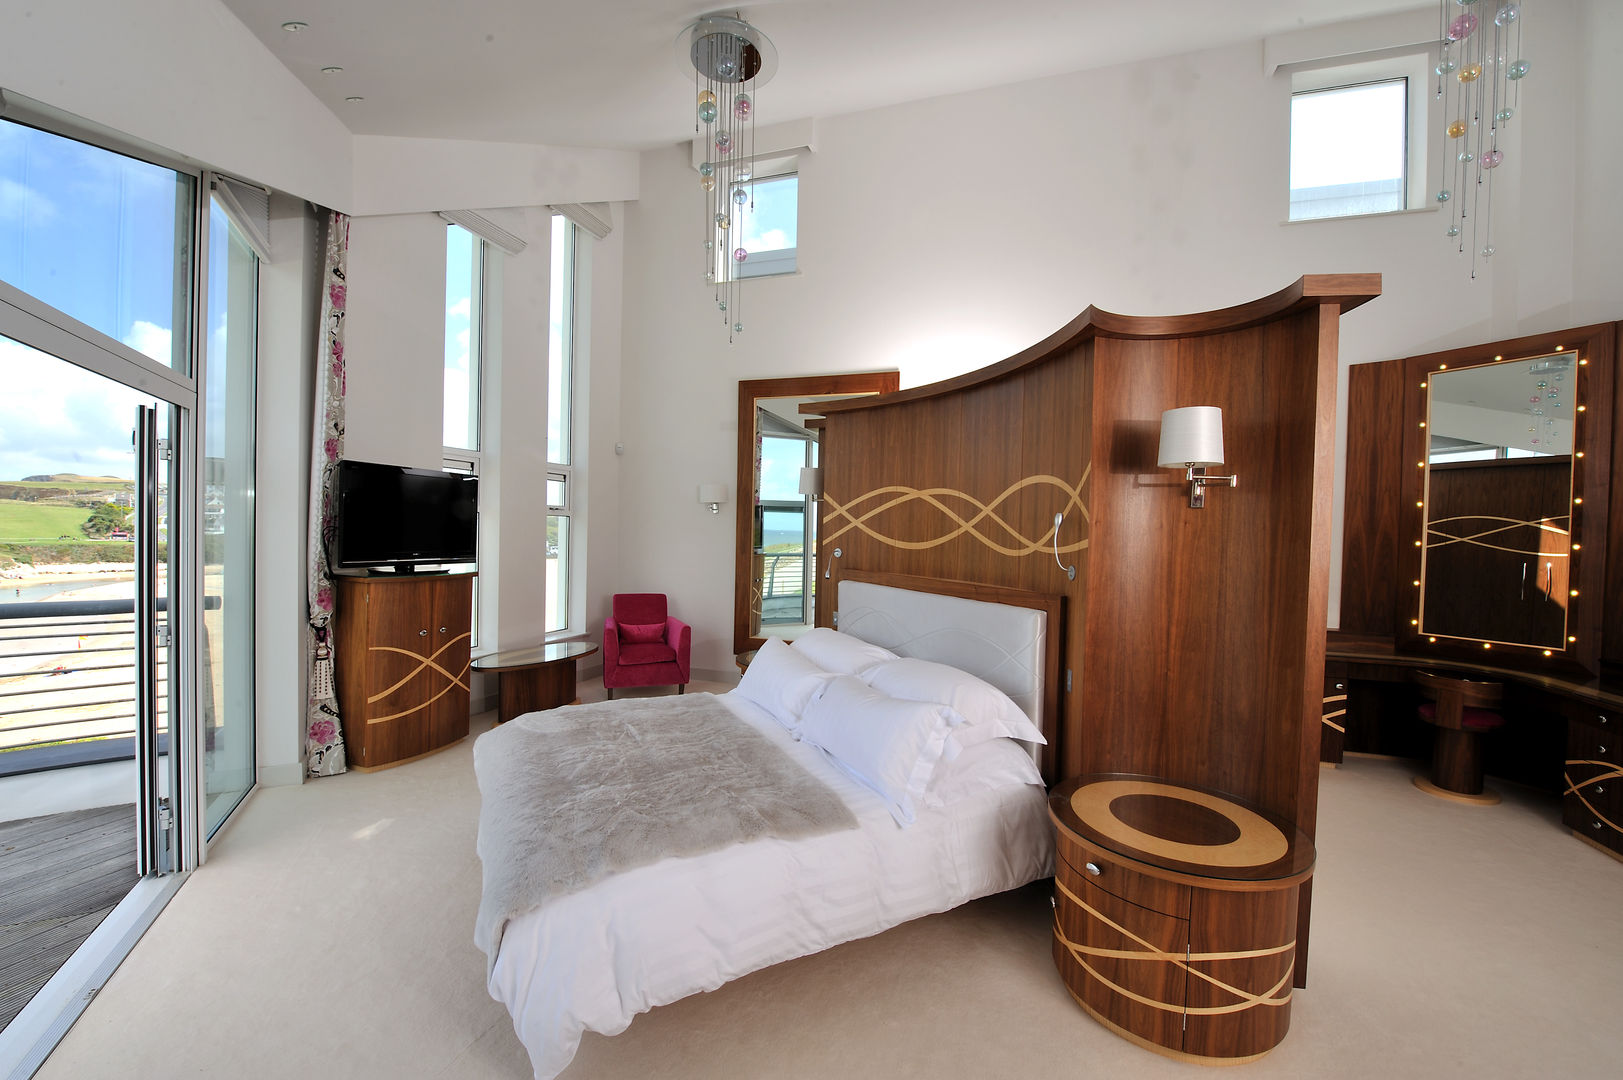 Sea House, Porth | Cornwall, Perfect Stays Perfect Stays Quartos ecléticos Master bedroom,bedroom,bedroom furniture,sea views,luxury,holiday home,beach house